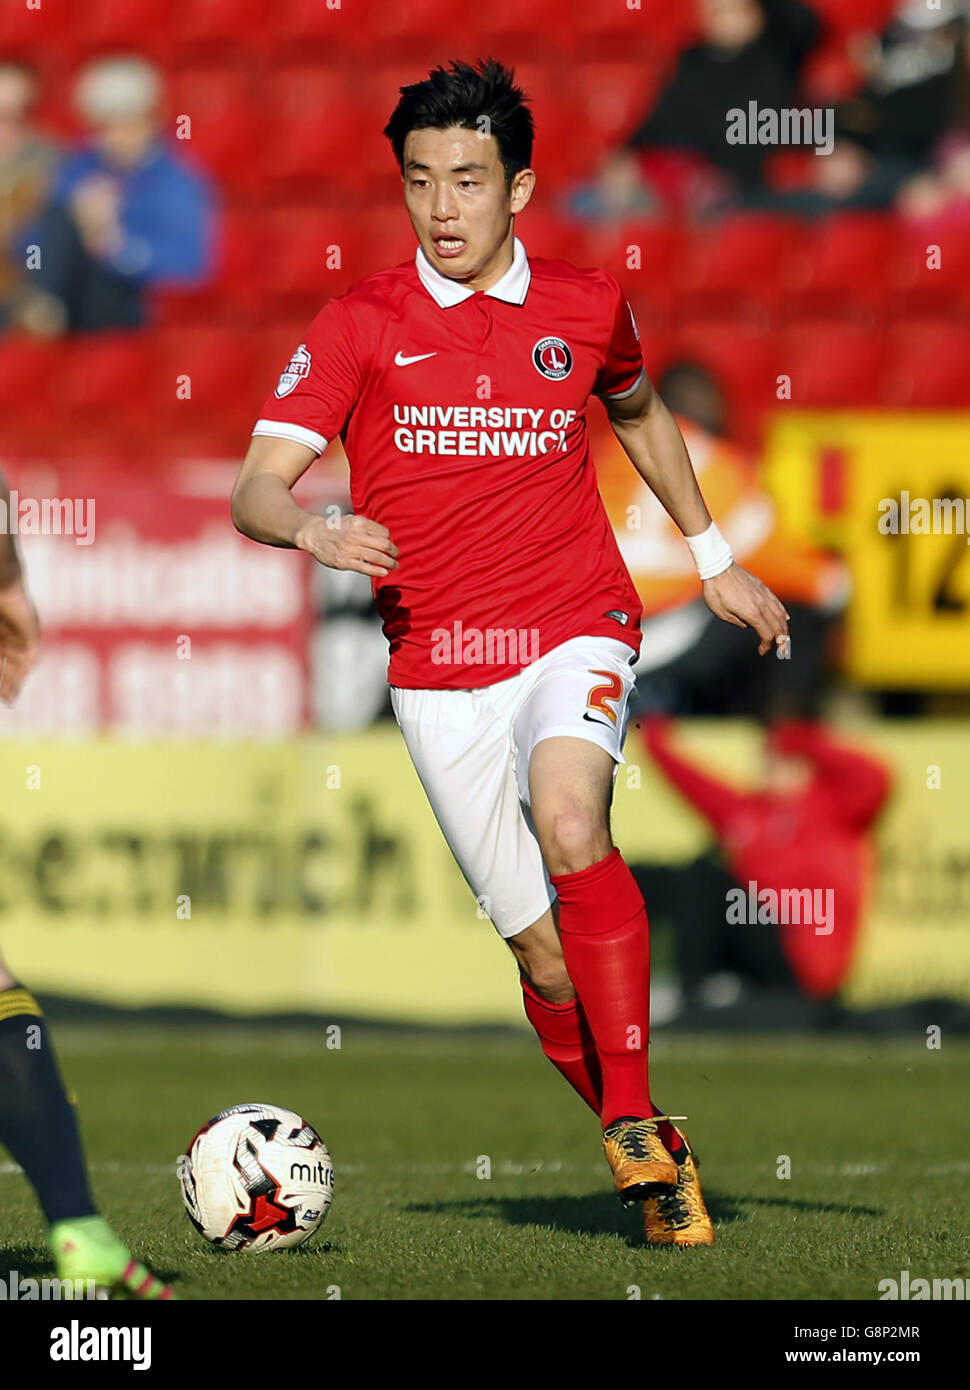 Charlton Athletic v Middlesbrough - Sky Bet Championship - The Valley. Charlton Athletic's Yun Suk-young Stock Photo